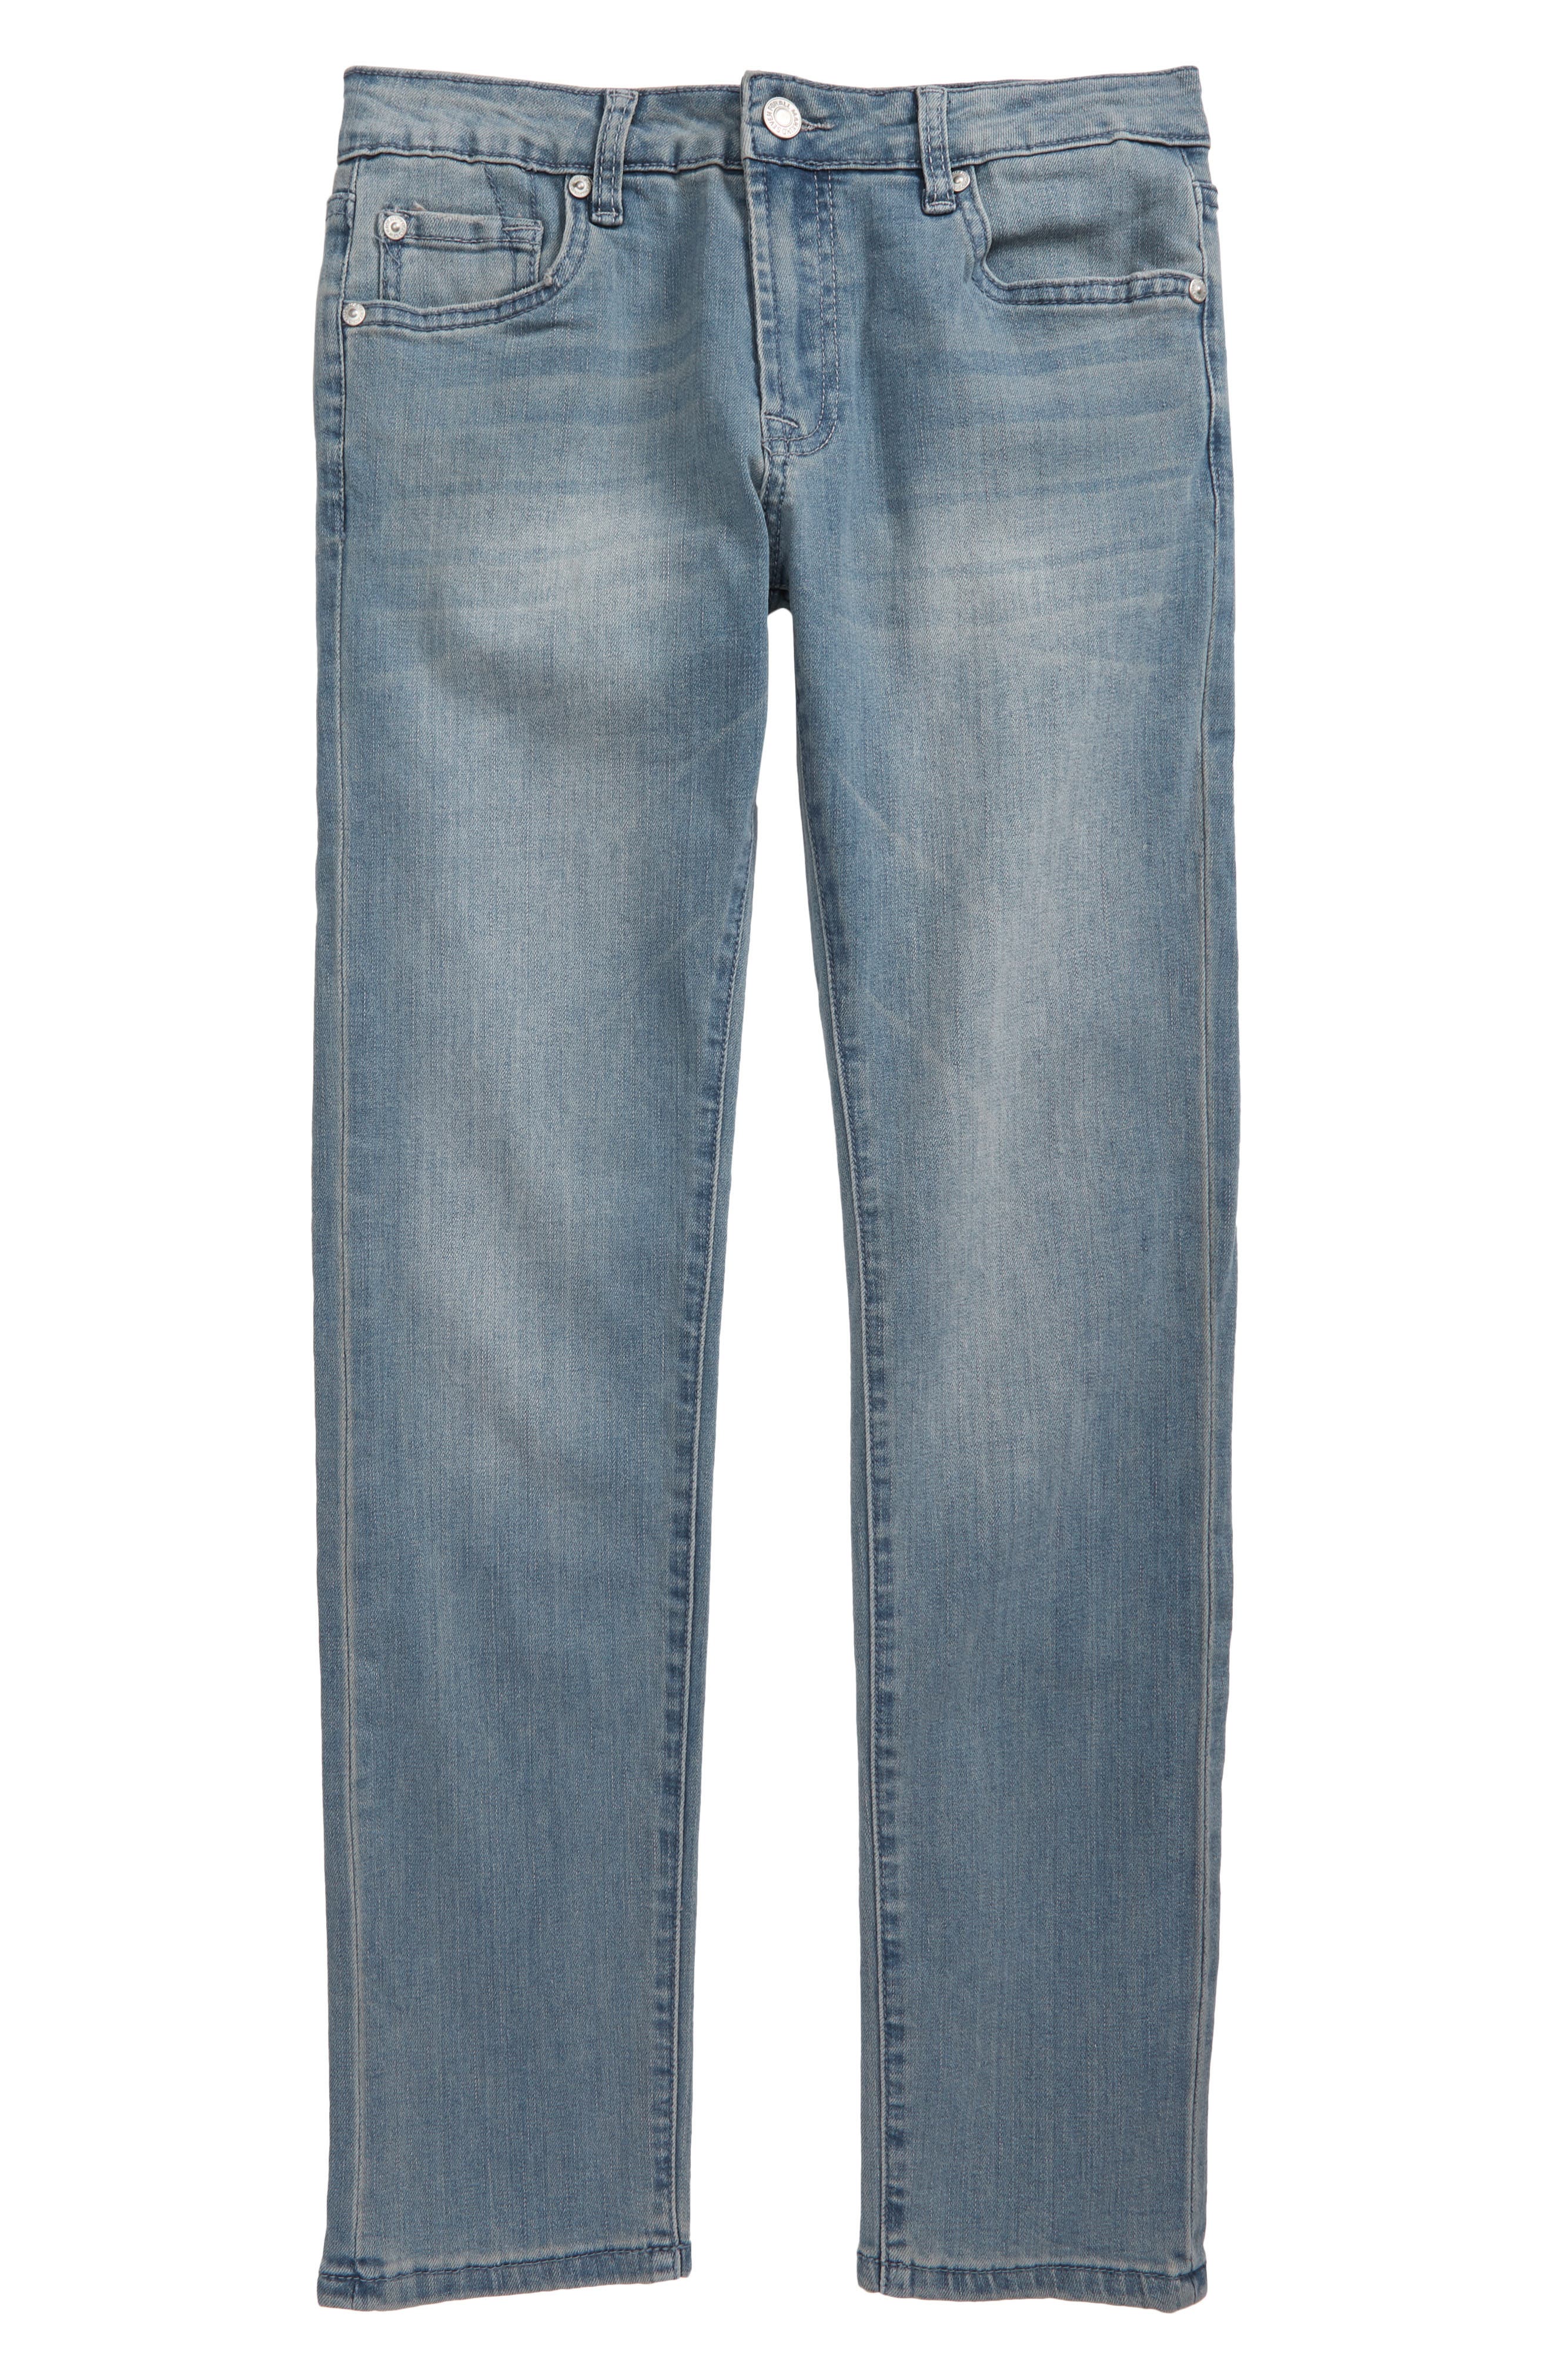 7 for all mankind mens jeans australia